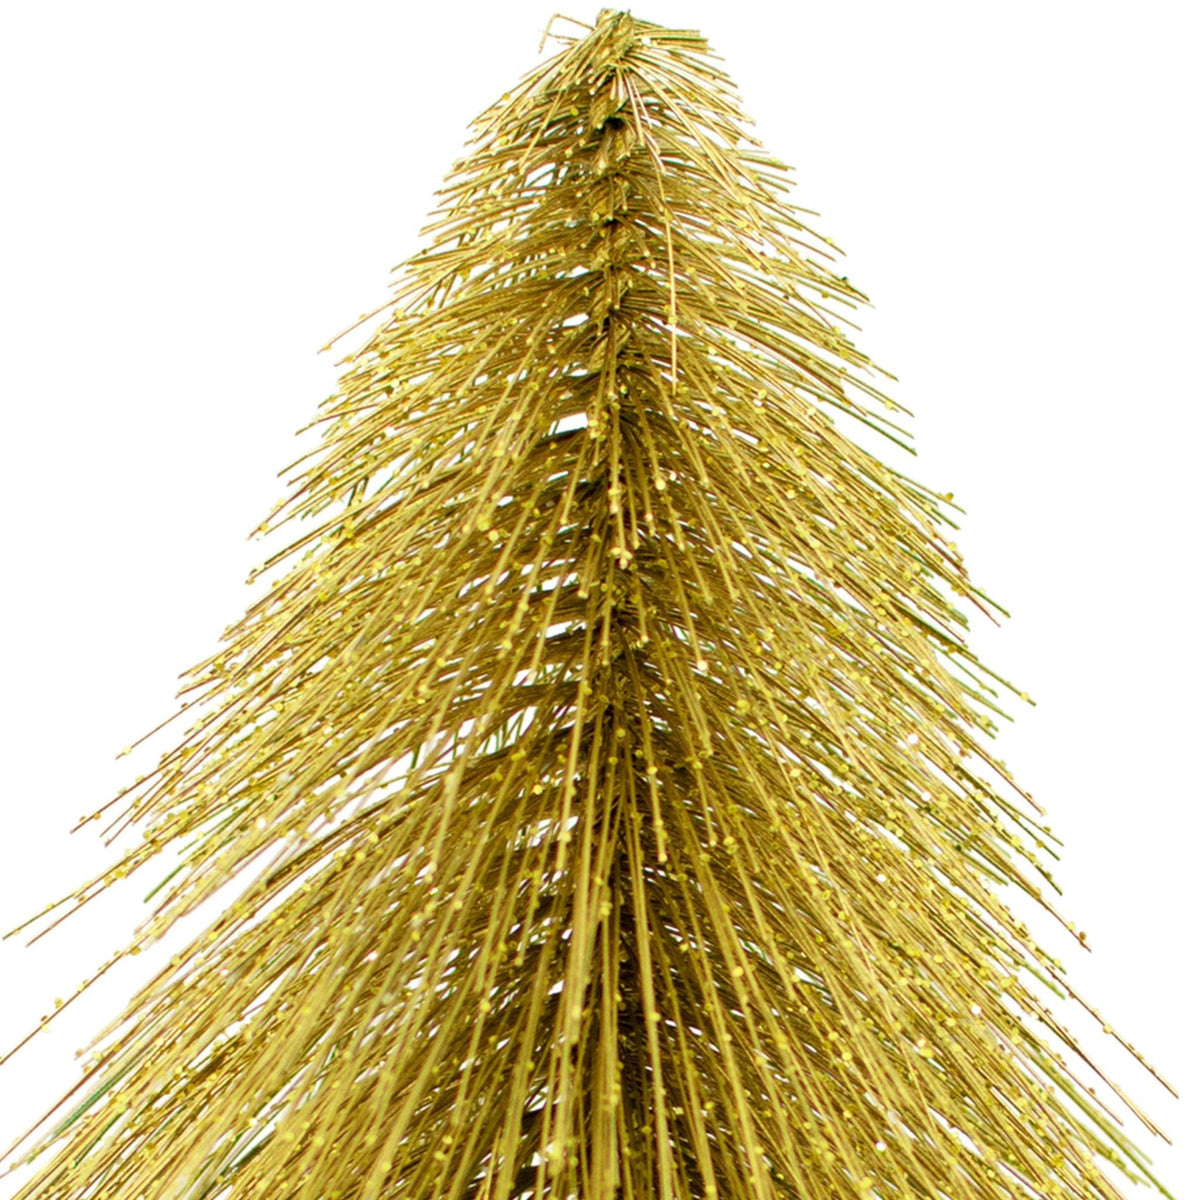 Mini Gold Bottlebrush Christmas Trees are sold at leedisplay.com. Gold trees come with sparkling glitter.